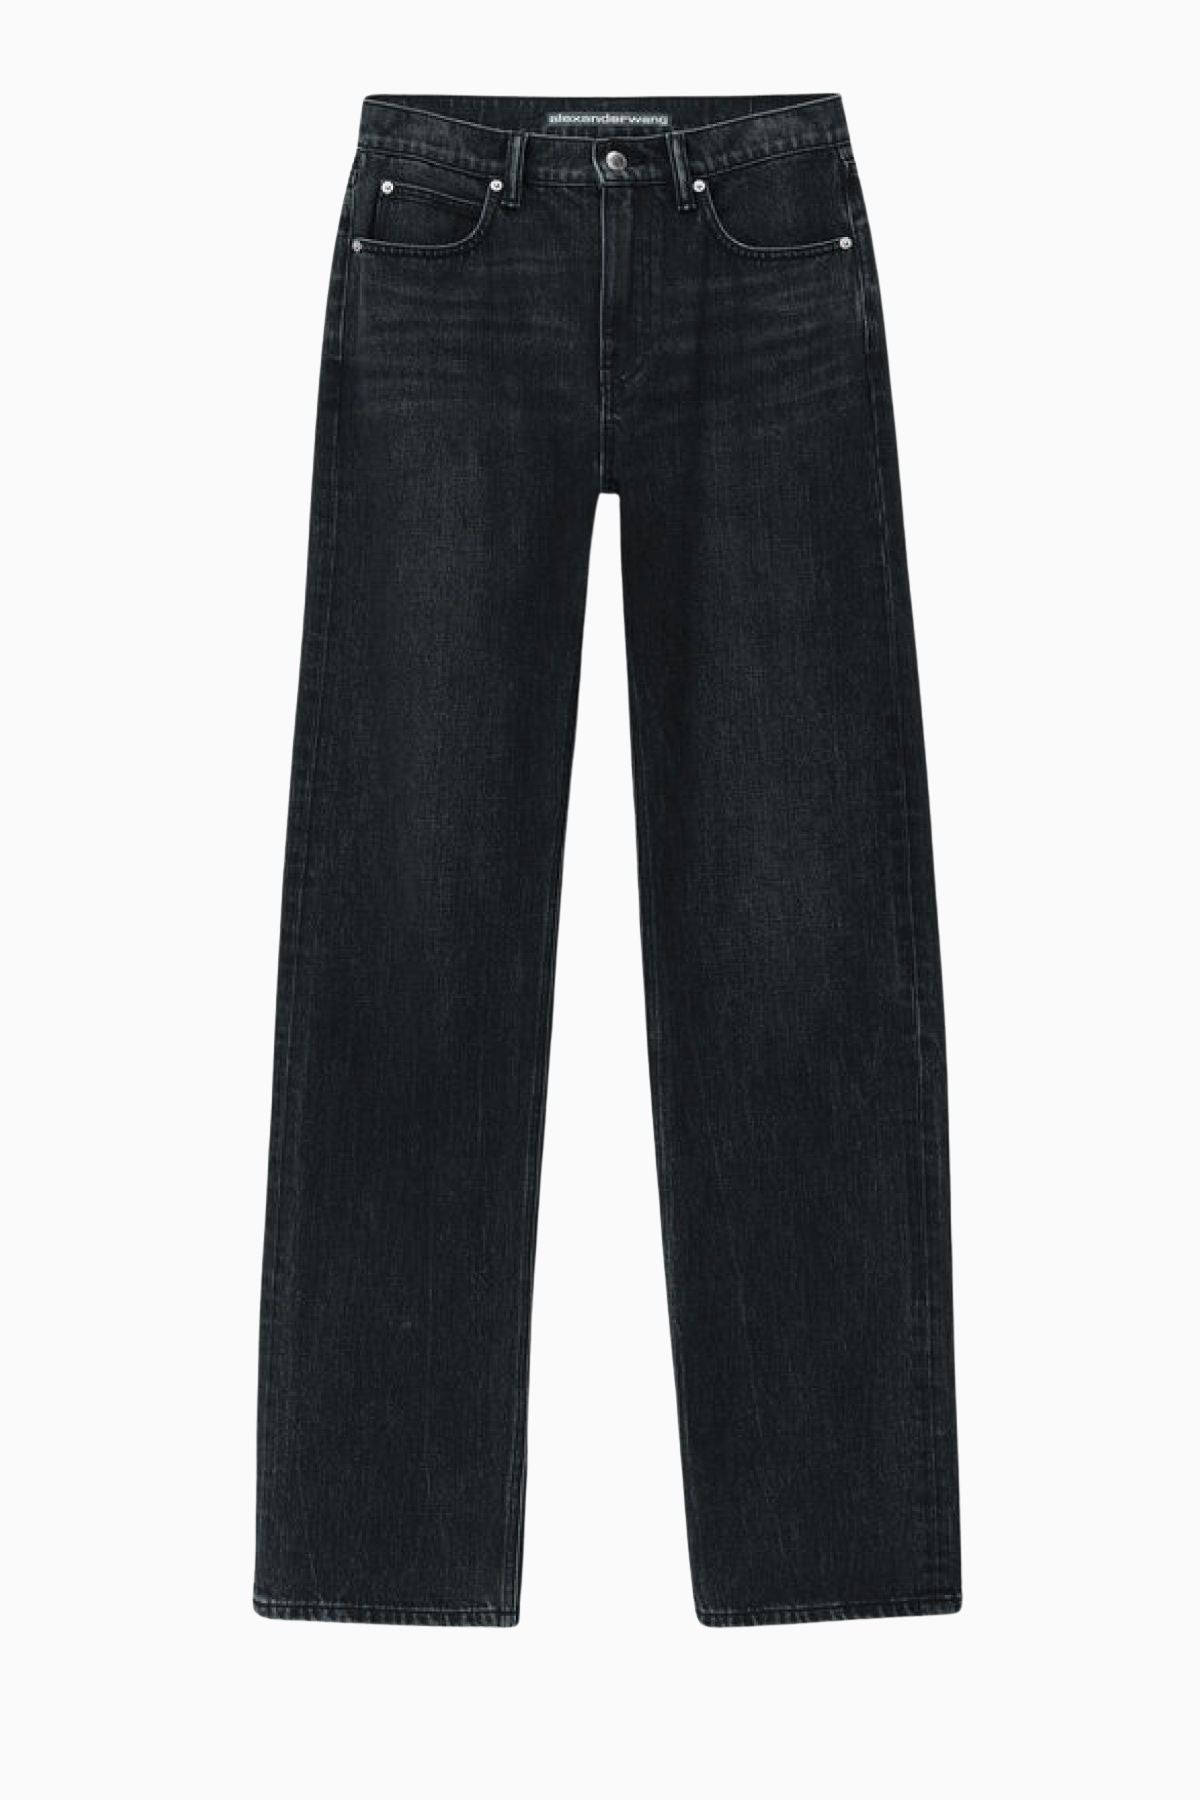 Alexander Wang EZ Mid Rise Relaxed Straight Logo Pocket Jeans - Grey Aged